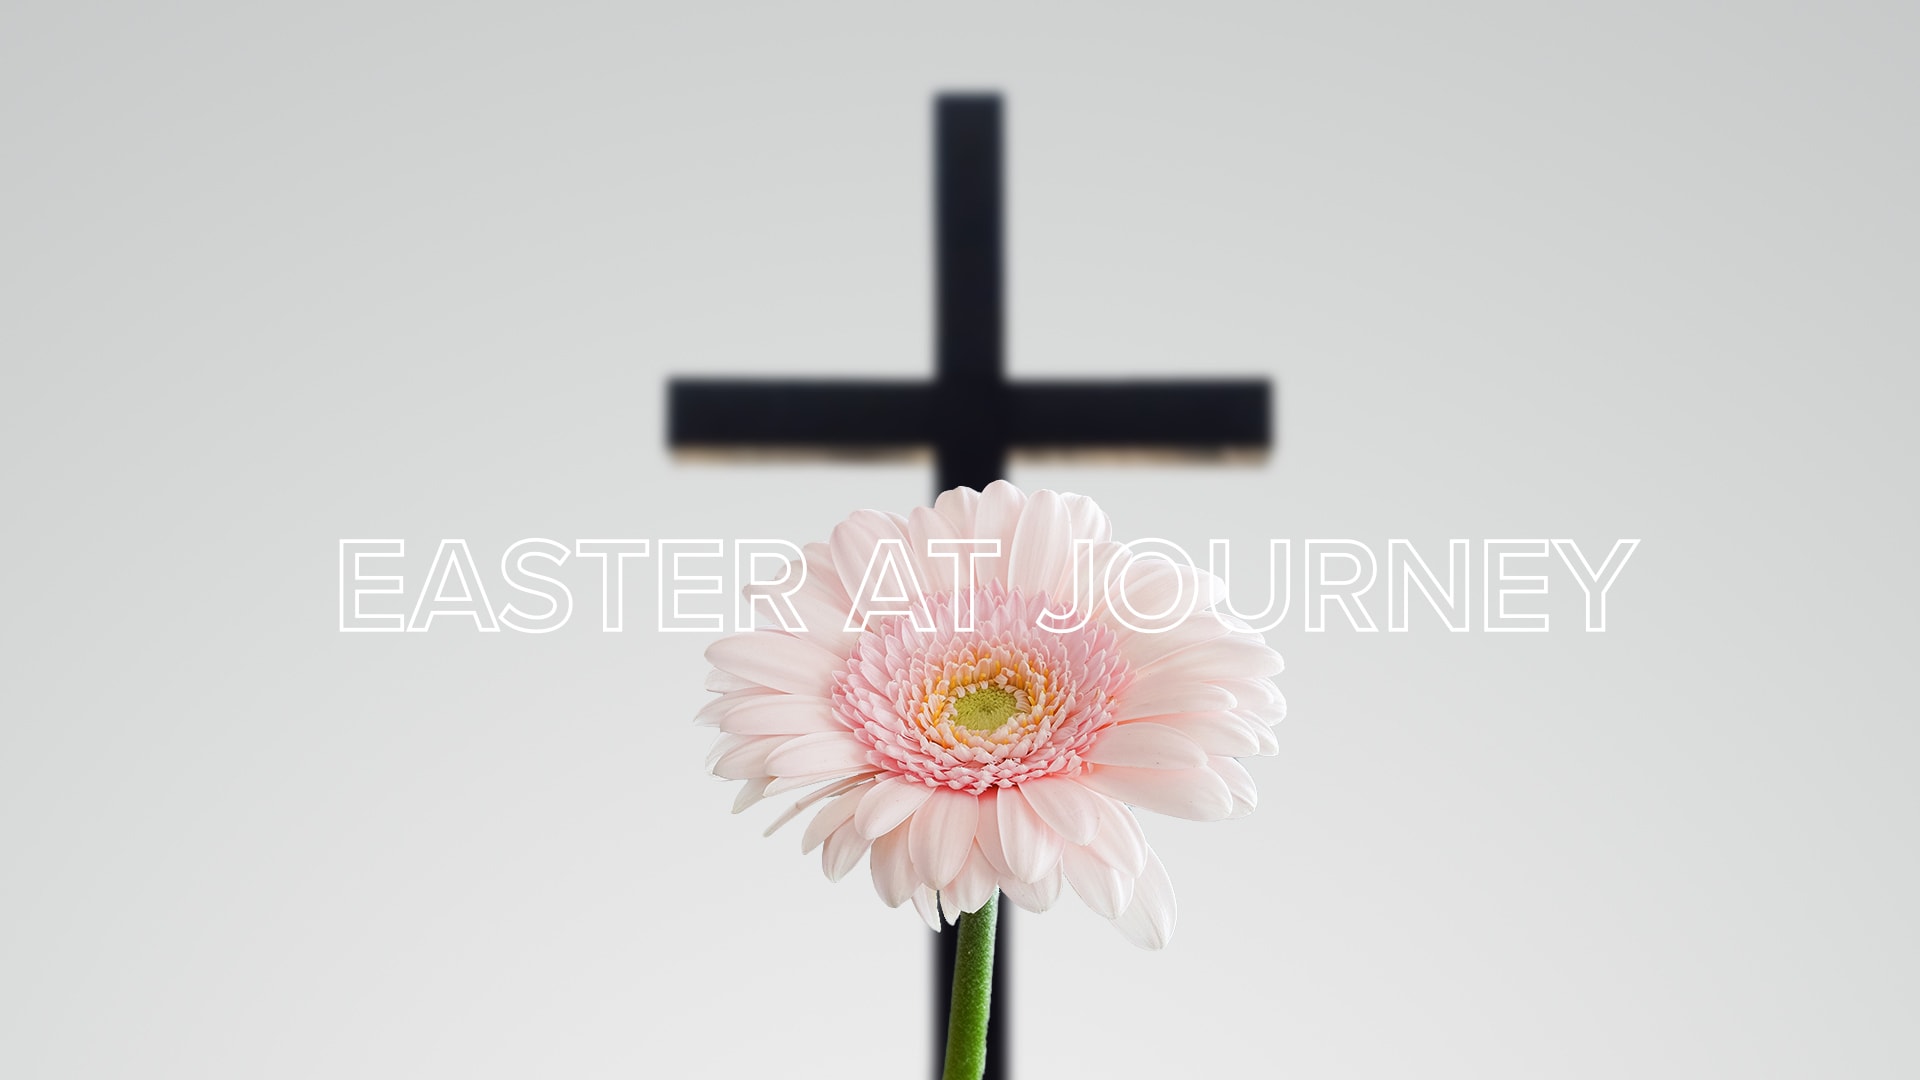 Featured image for “Easter at Journey”